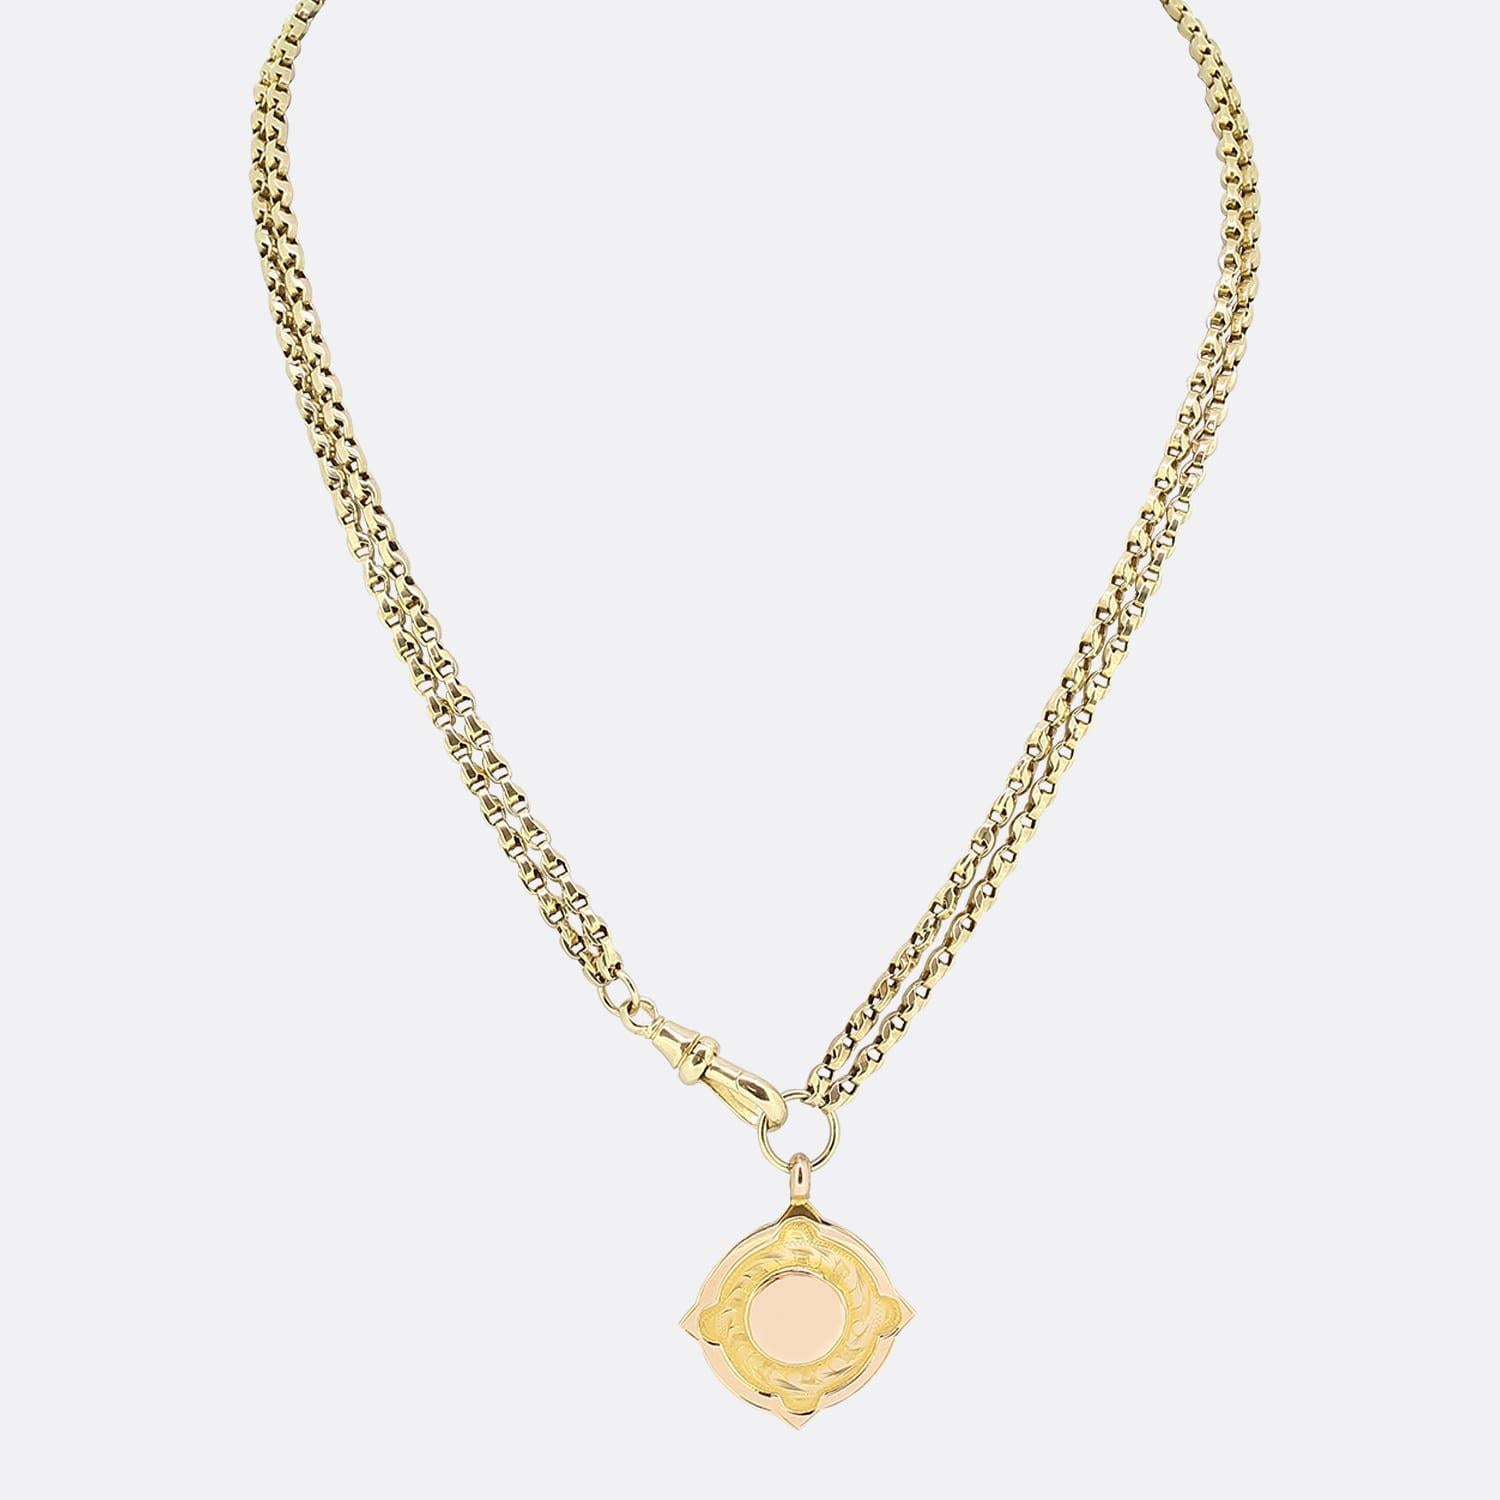 This is a vintage 9ct yellow gold belcher charm necklace. The necklace has an antique fob suspended from the double link chain. The necklace is secured by an antique swivel clasp.

Condition: Used (Very Good)
Weight: 21.0 grams
Chain Length: 21